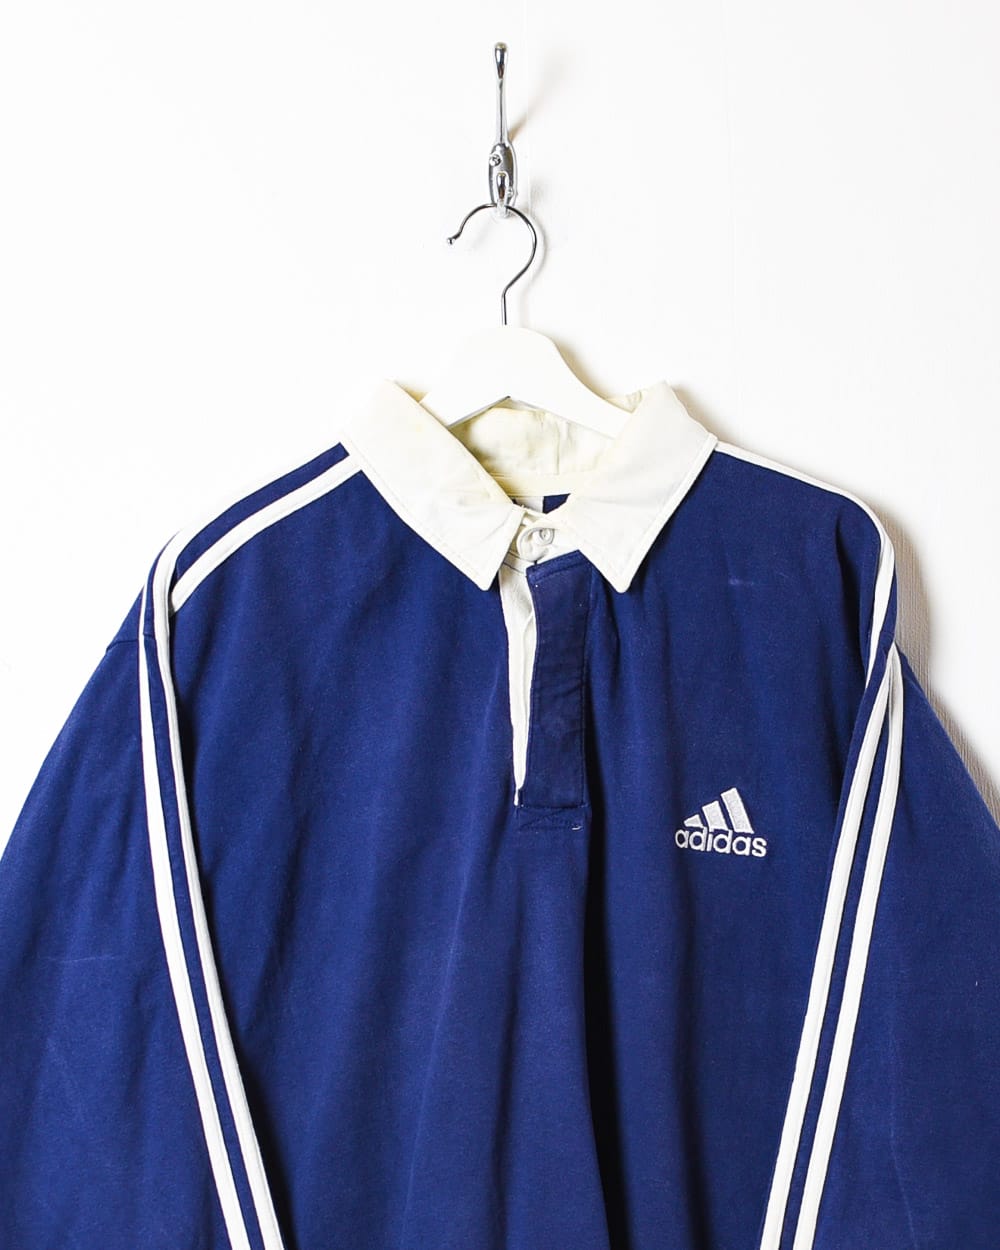 Navy Adidas Rugby Shirt - X-Large